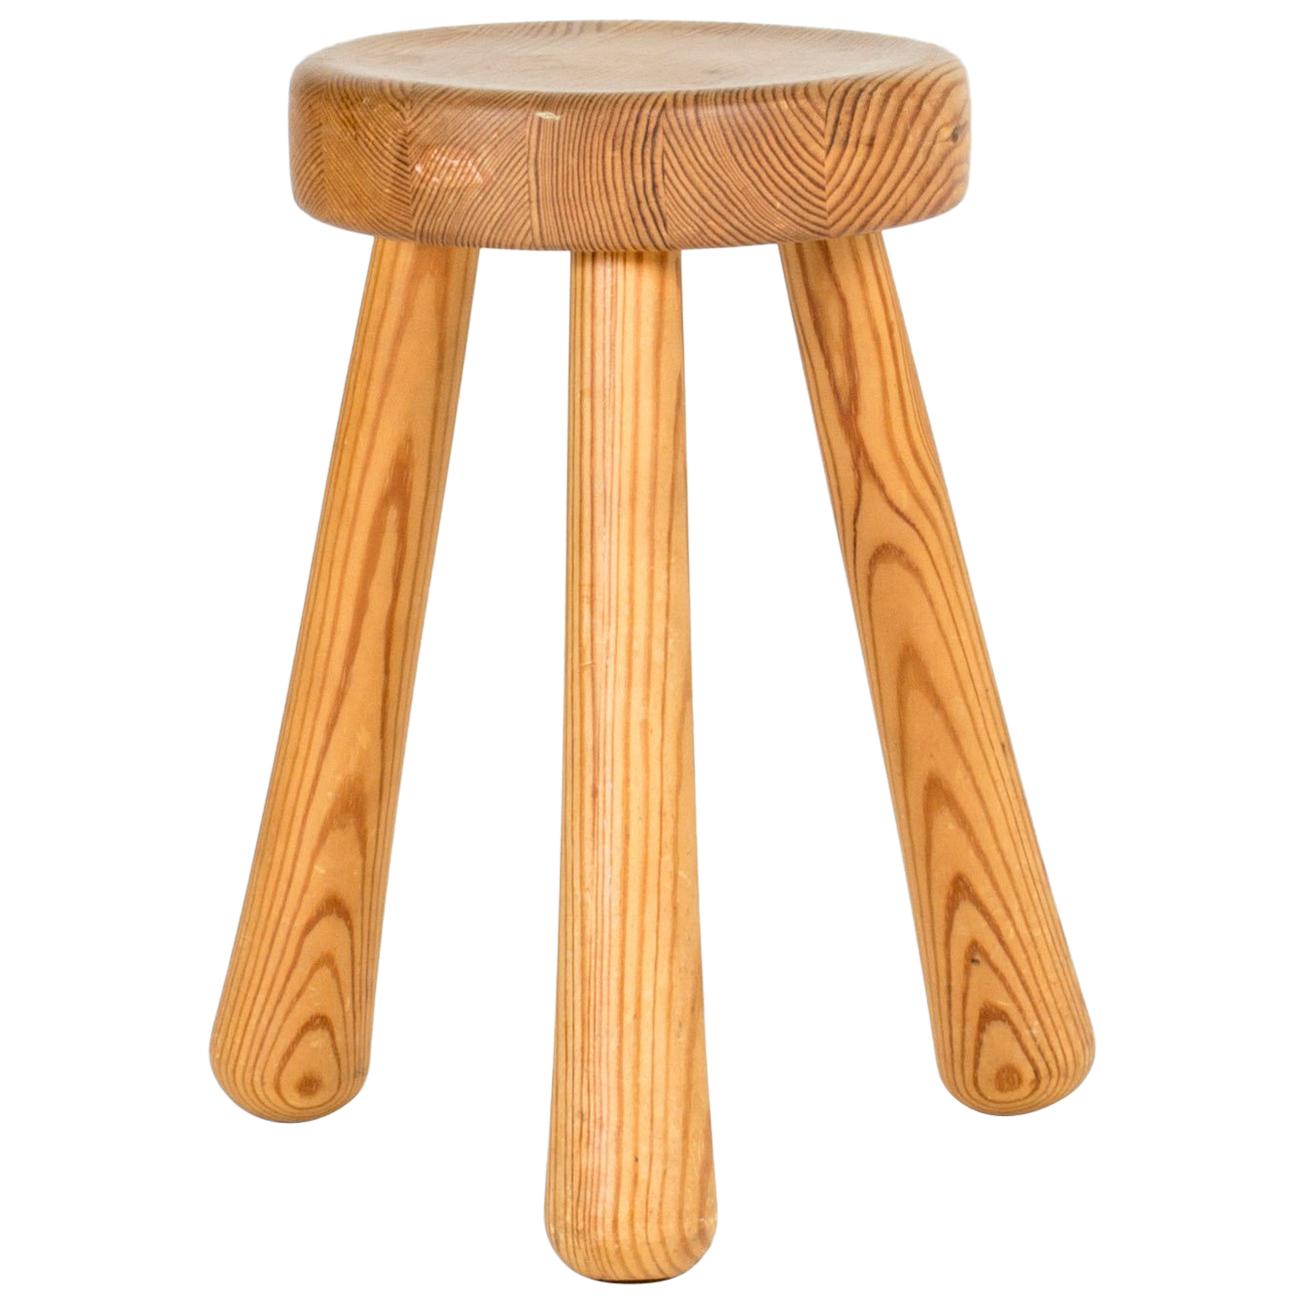 1940s Wooden Stool by Ingvar Hildingsson